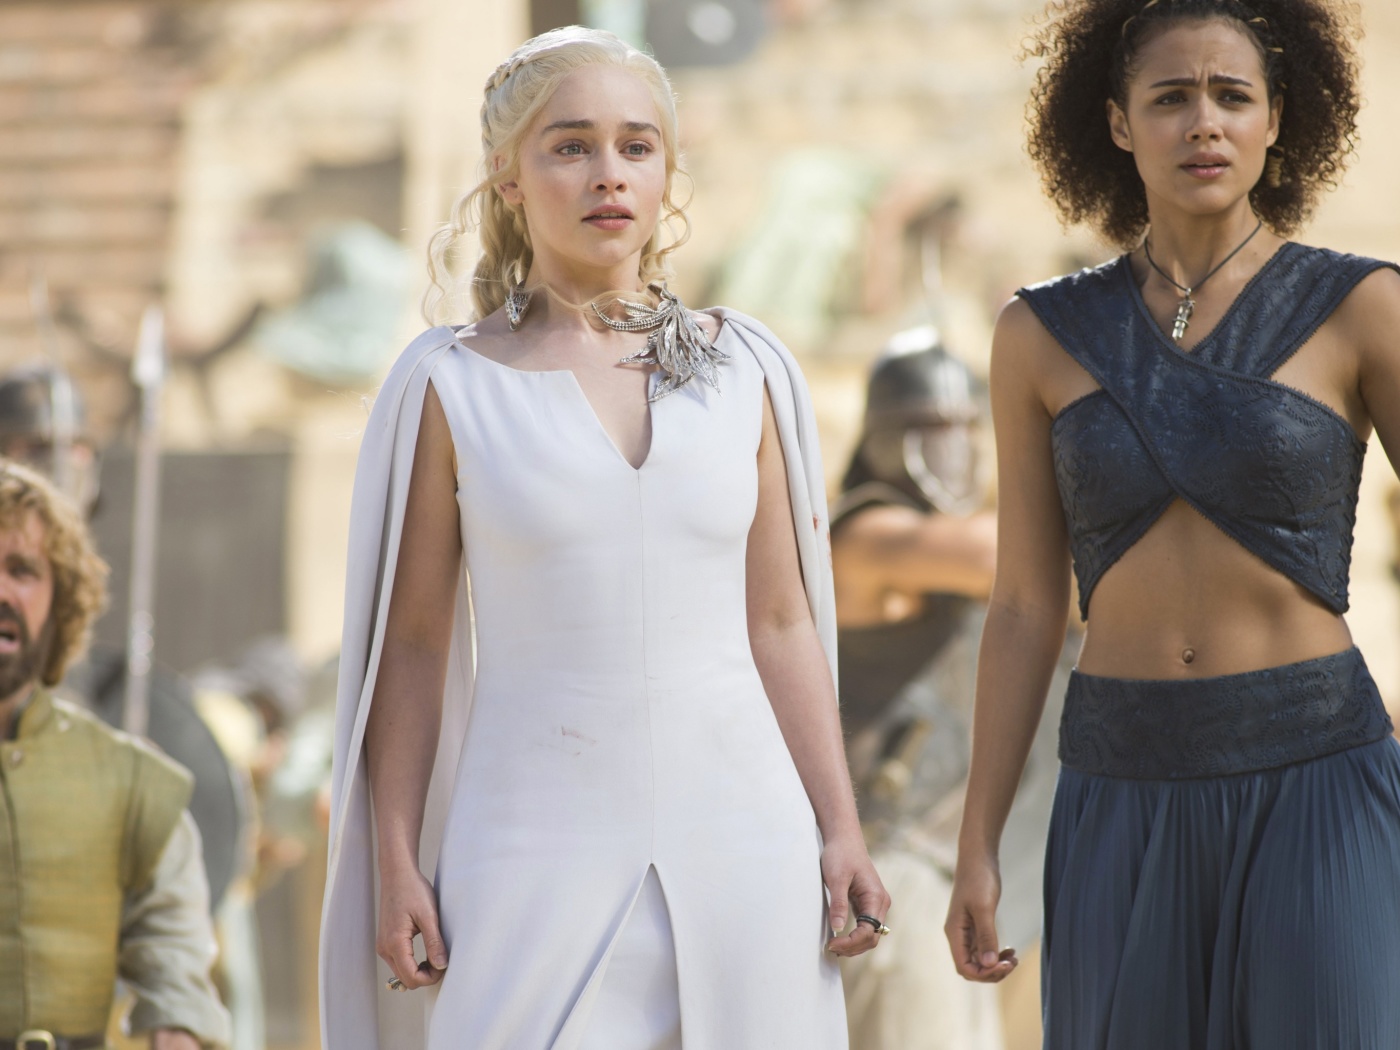 Game Of Thrones Emilia Clarke and Nathalie Emmanuel as Missandei wallpaper 1400x1050